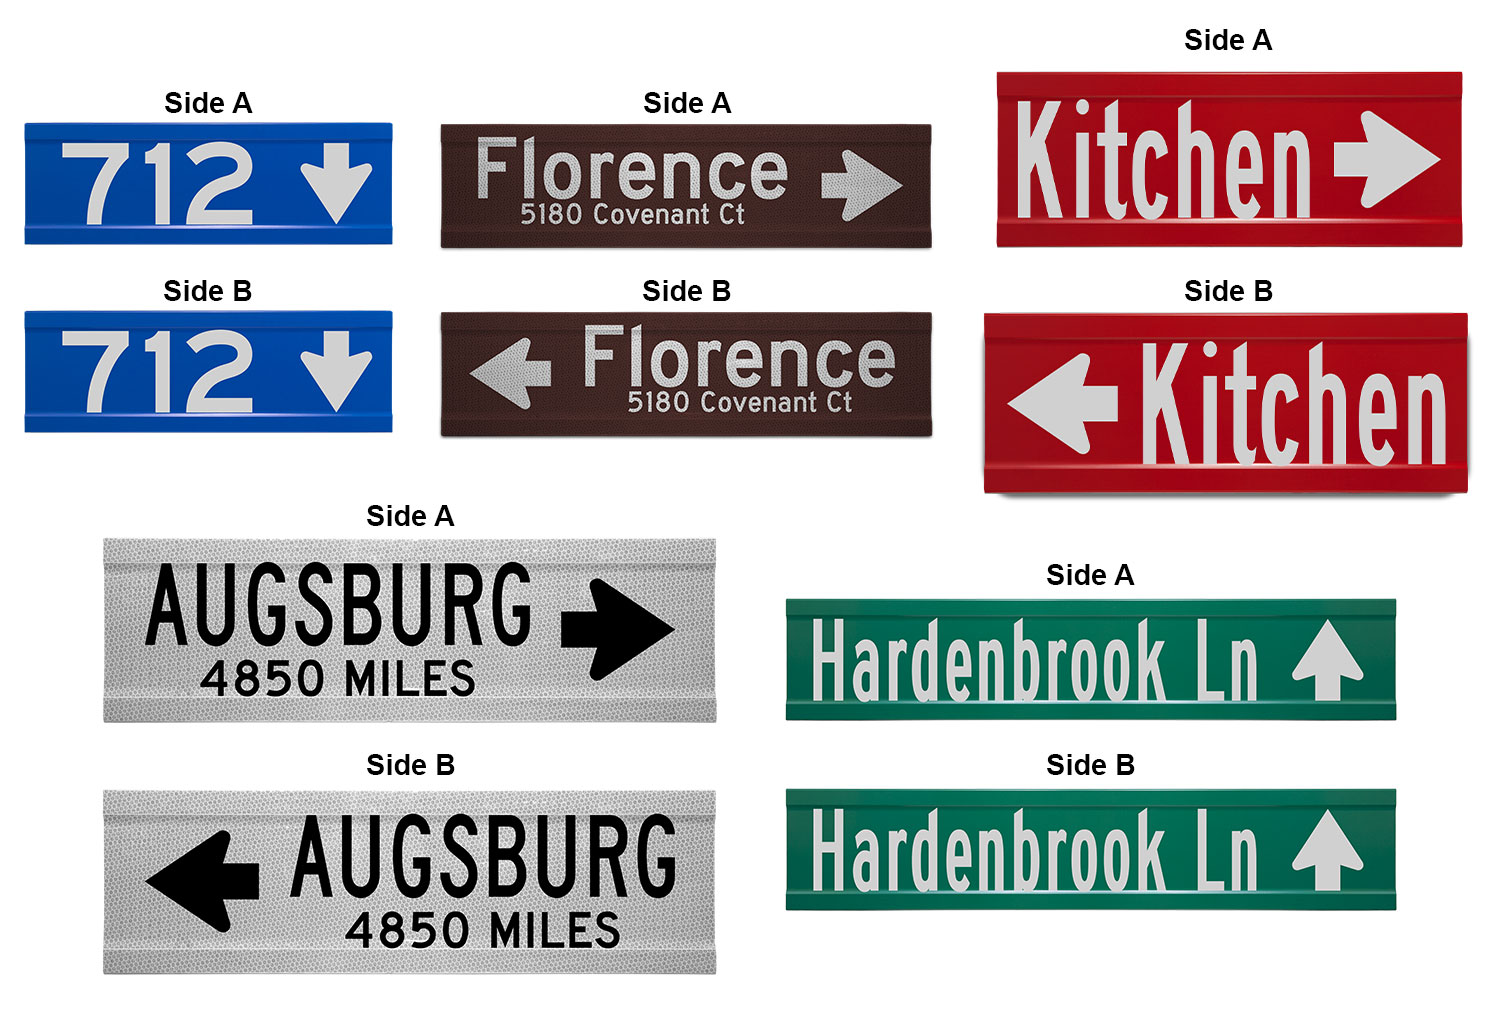 Samples of Printed Extruded Blade Signs with Directional Arrows